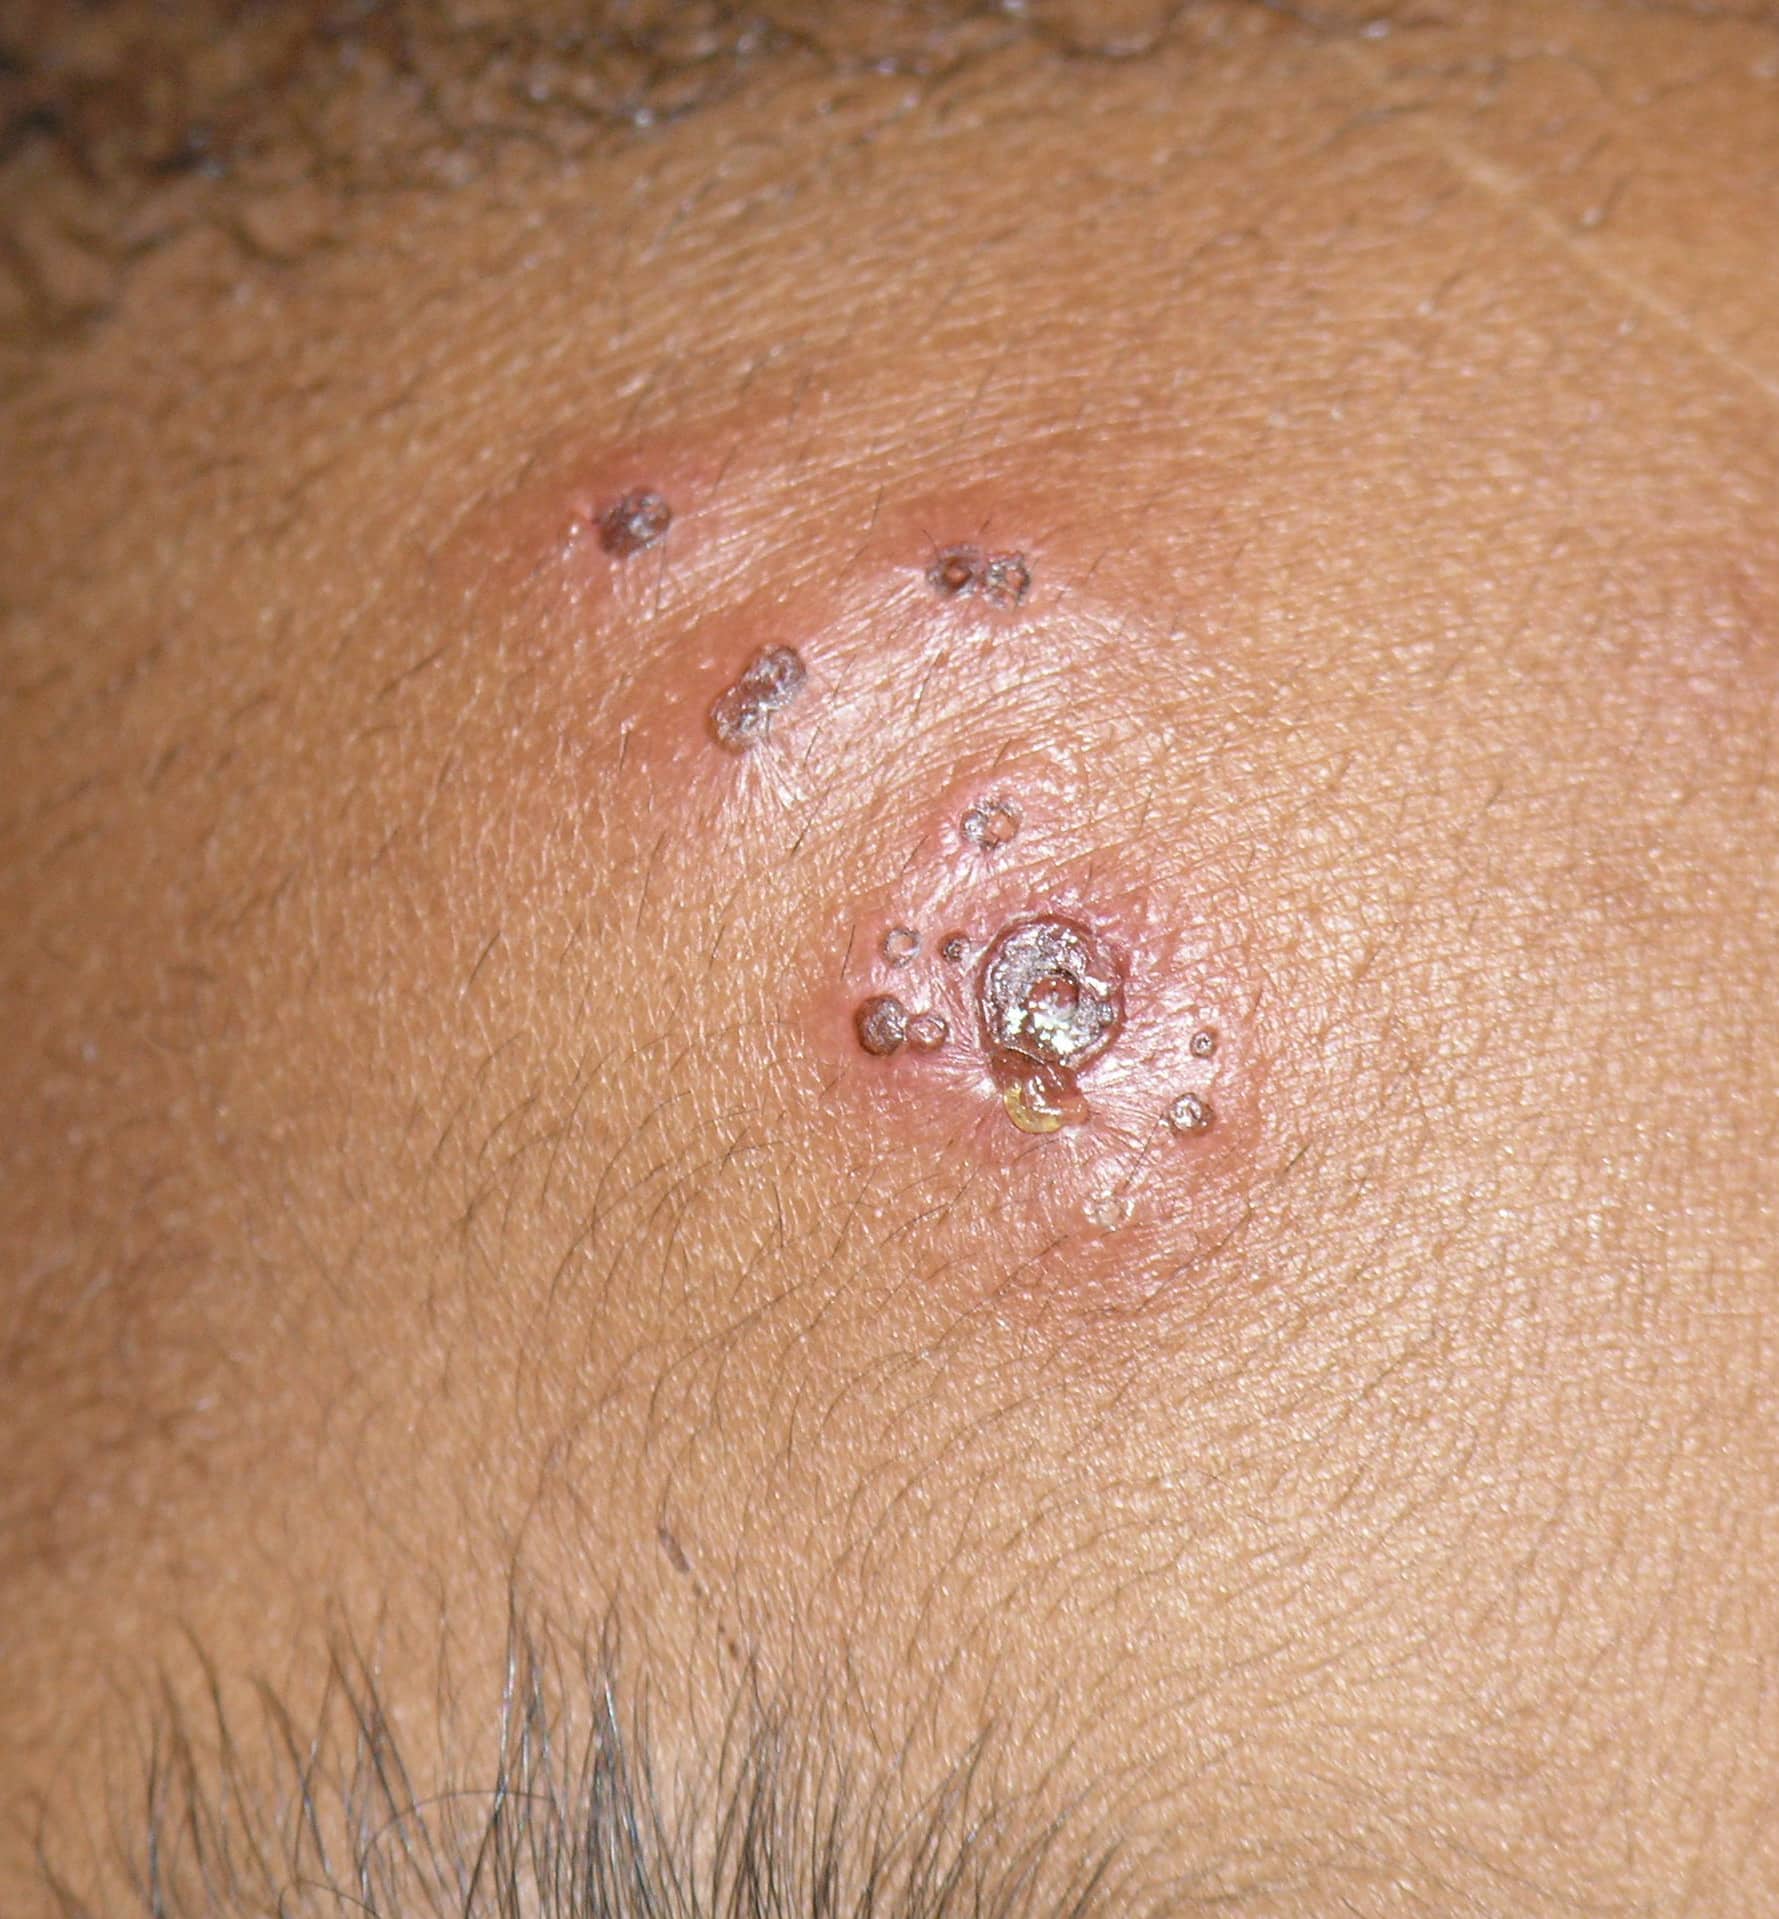 Do Herpes Outbreaks Happen In The Same Spot